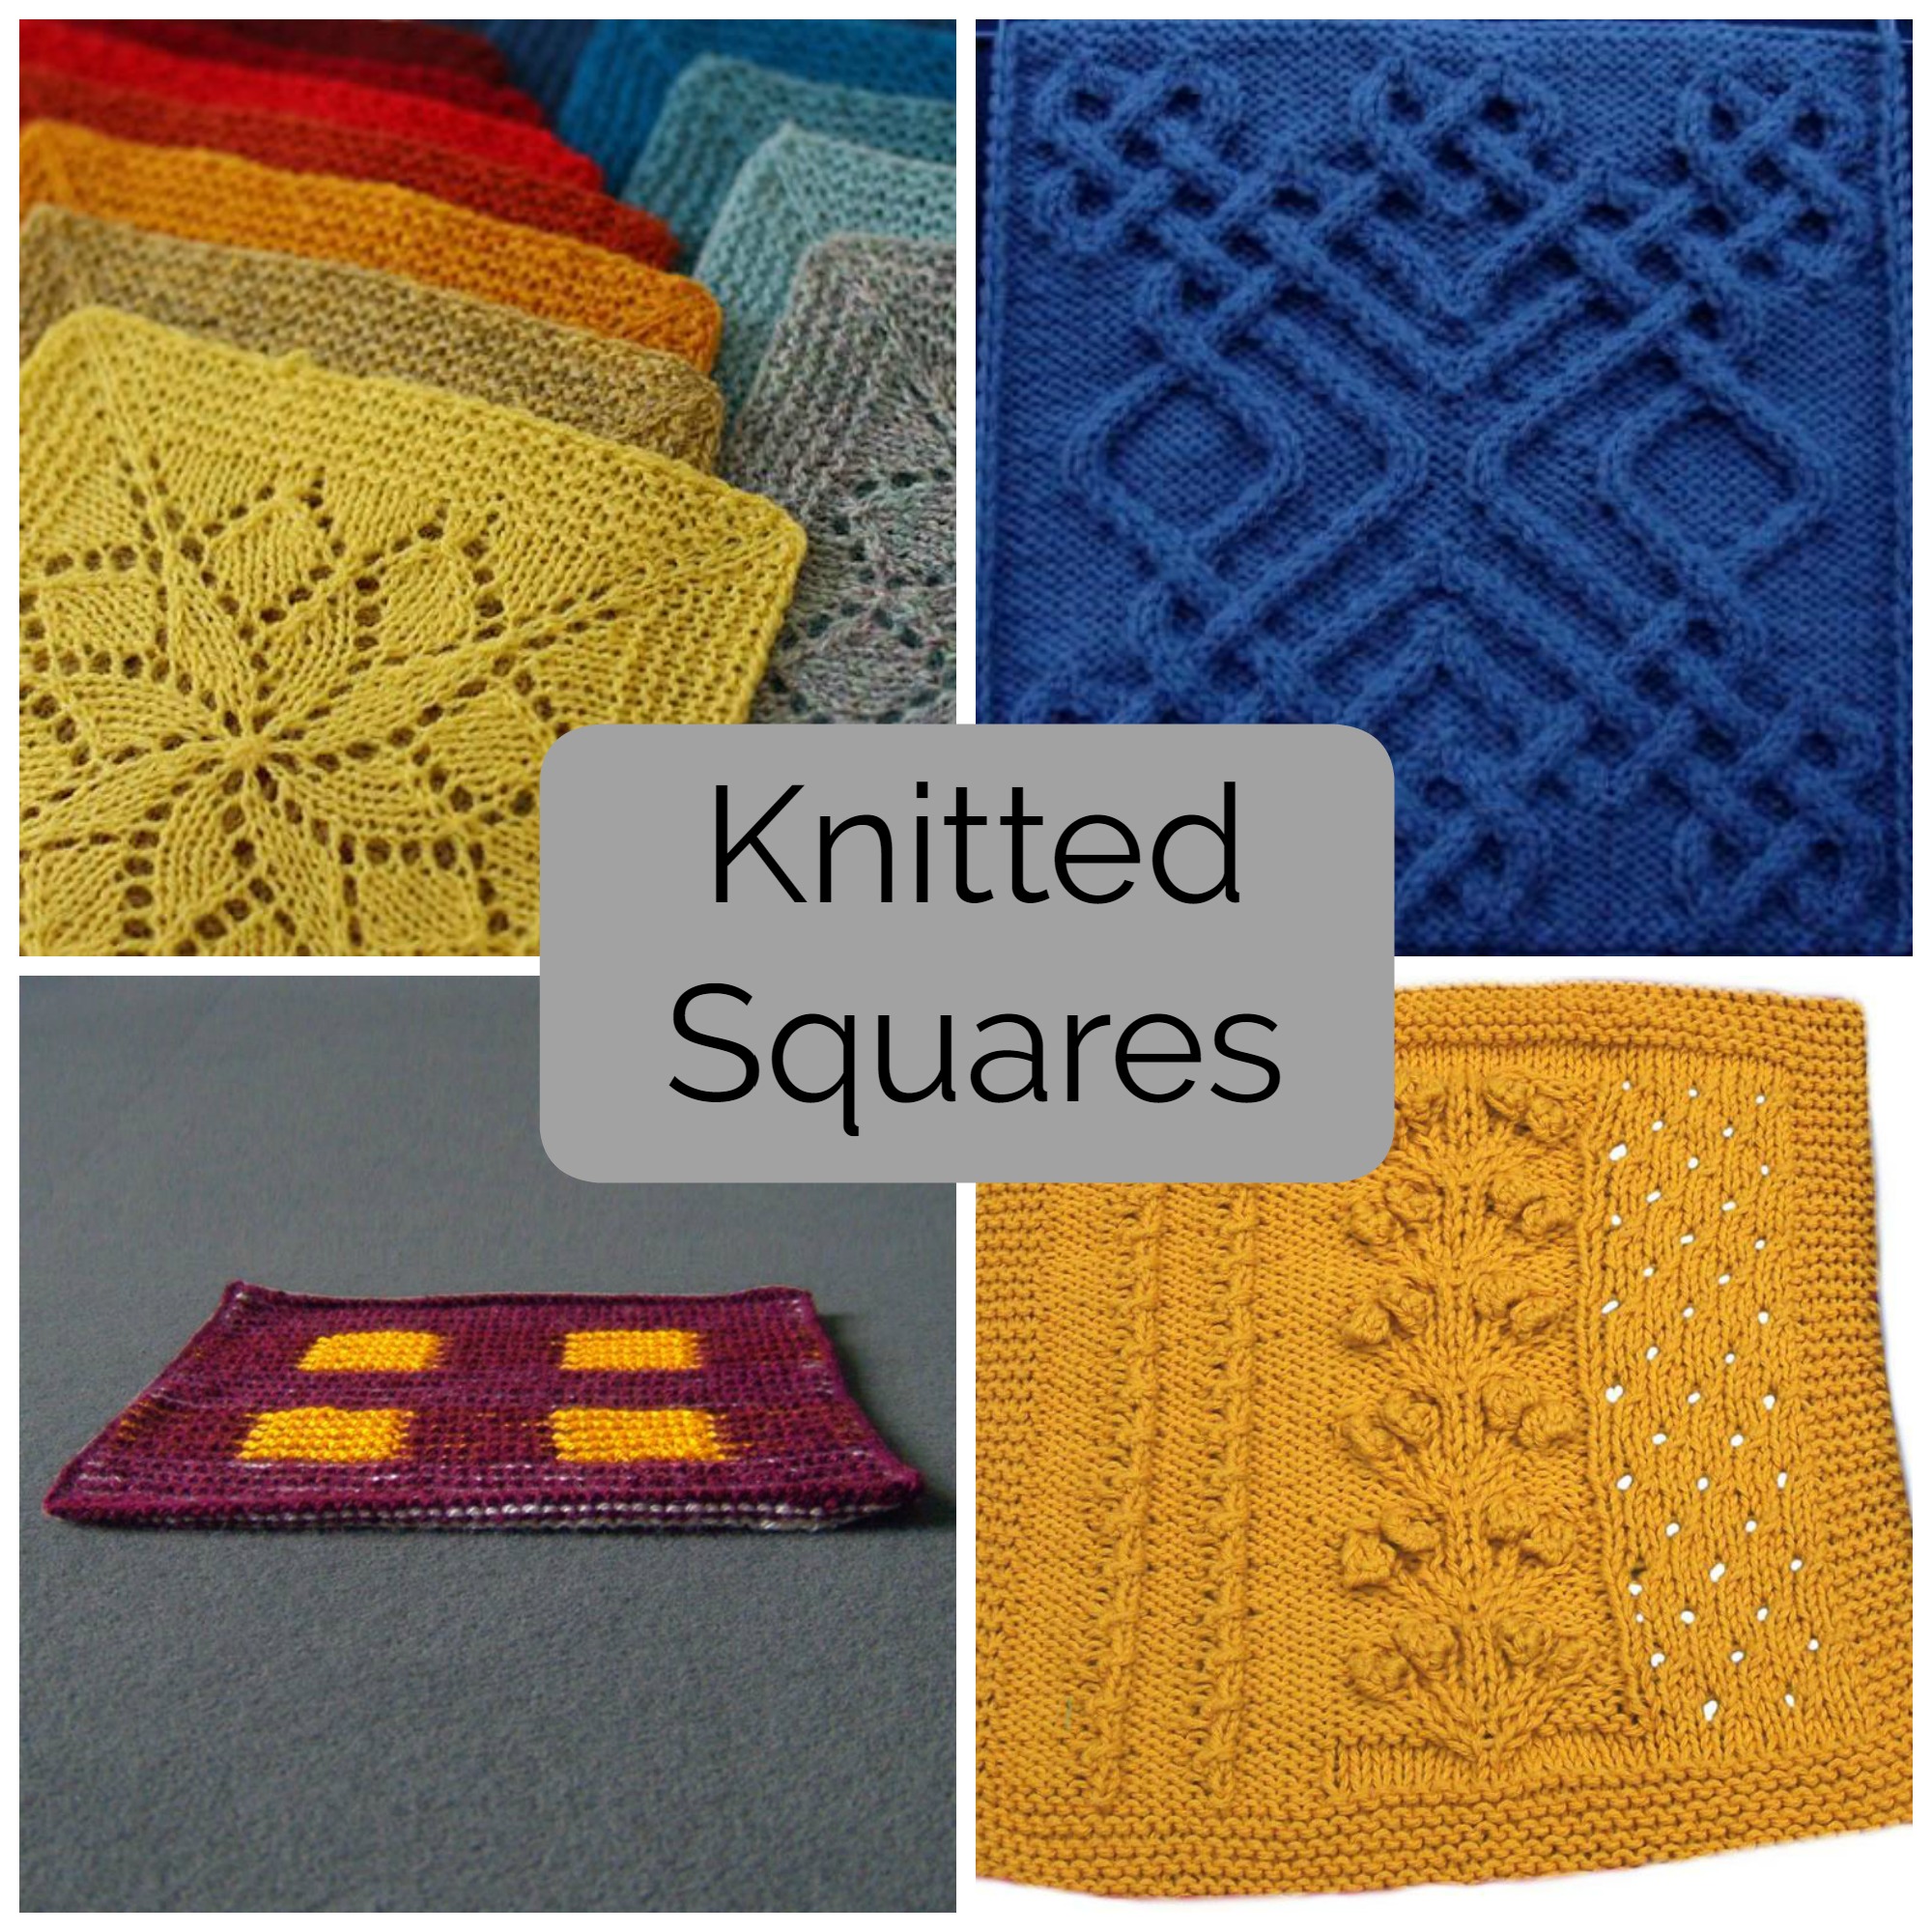 Knitted Squares